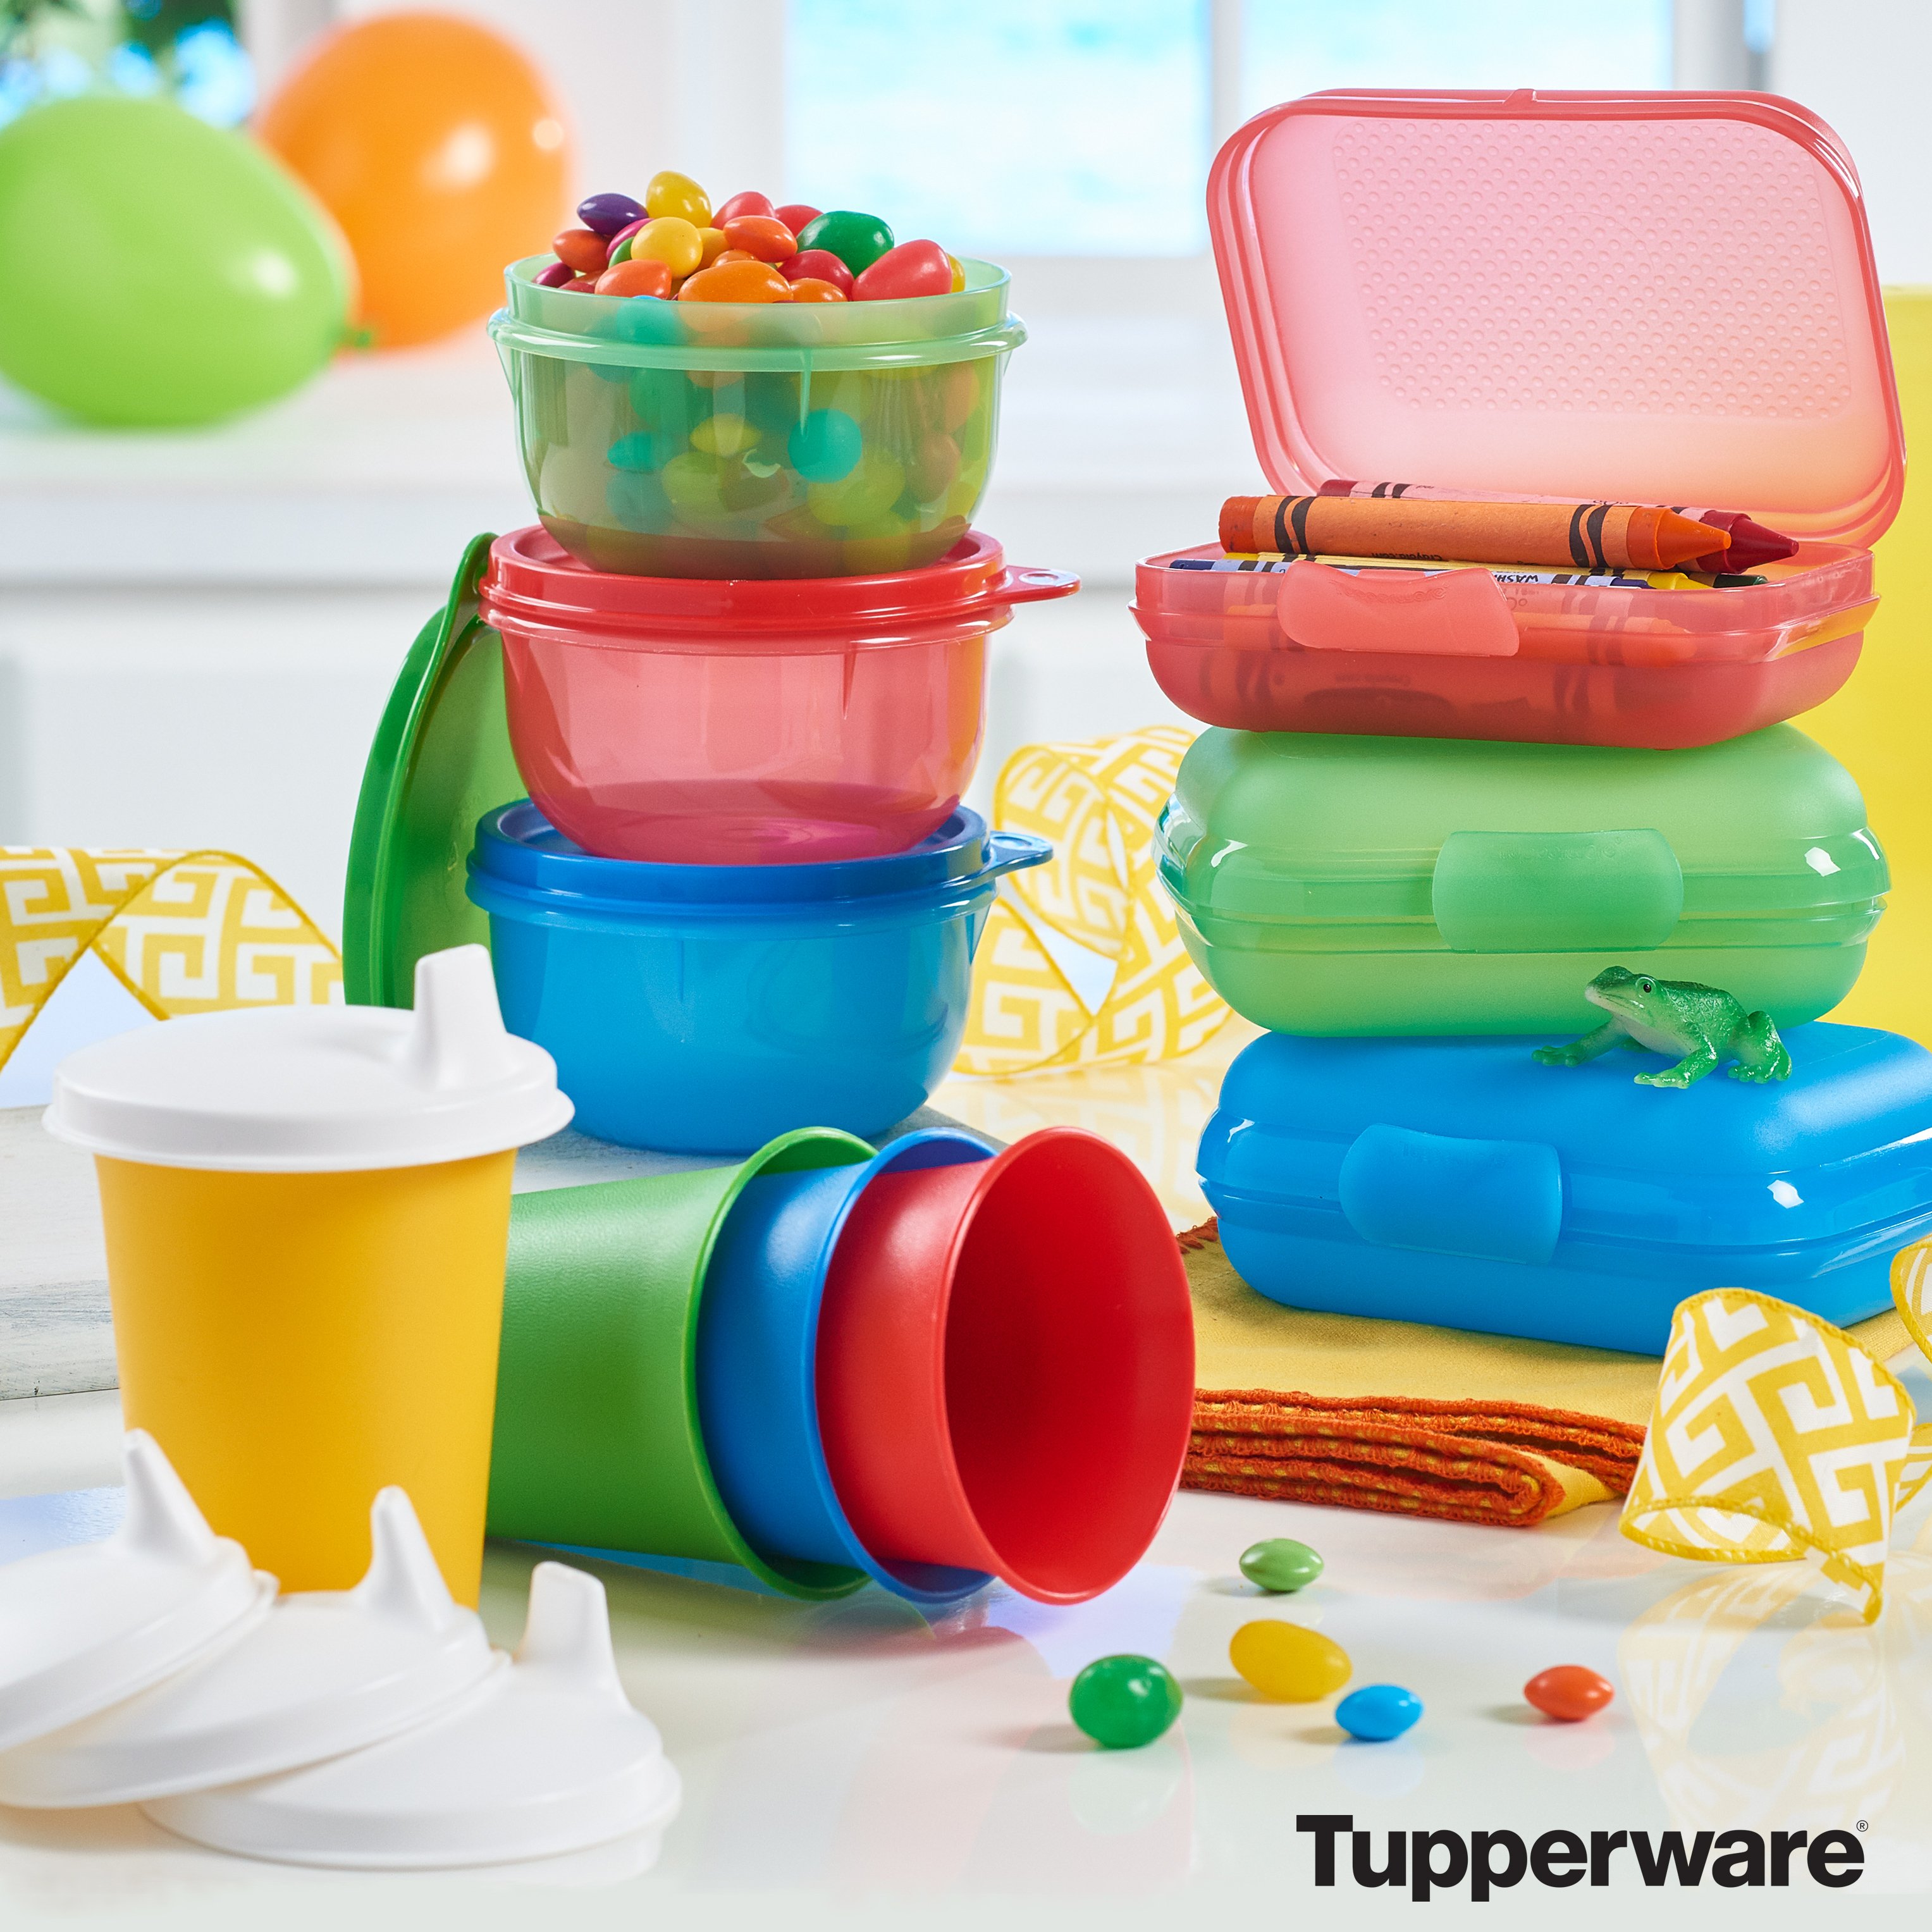 Tupperware on "Good things come in packages! That's our Lit'l Gifts is perfect for your next baby shower and beyond. https://t.co/vJAnT6ABt9" / X